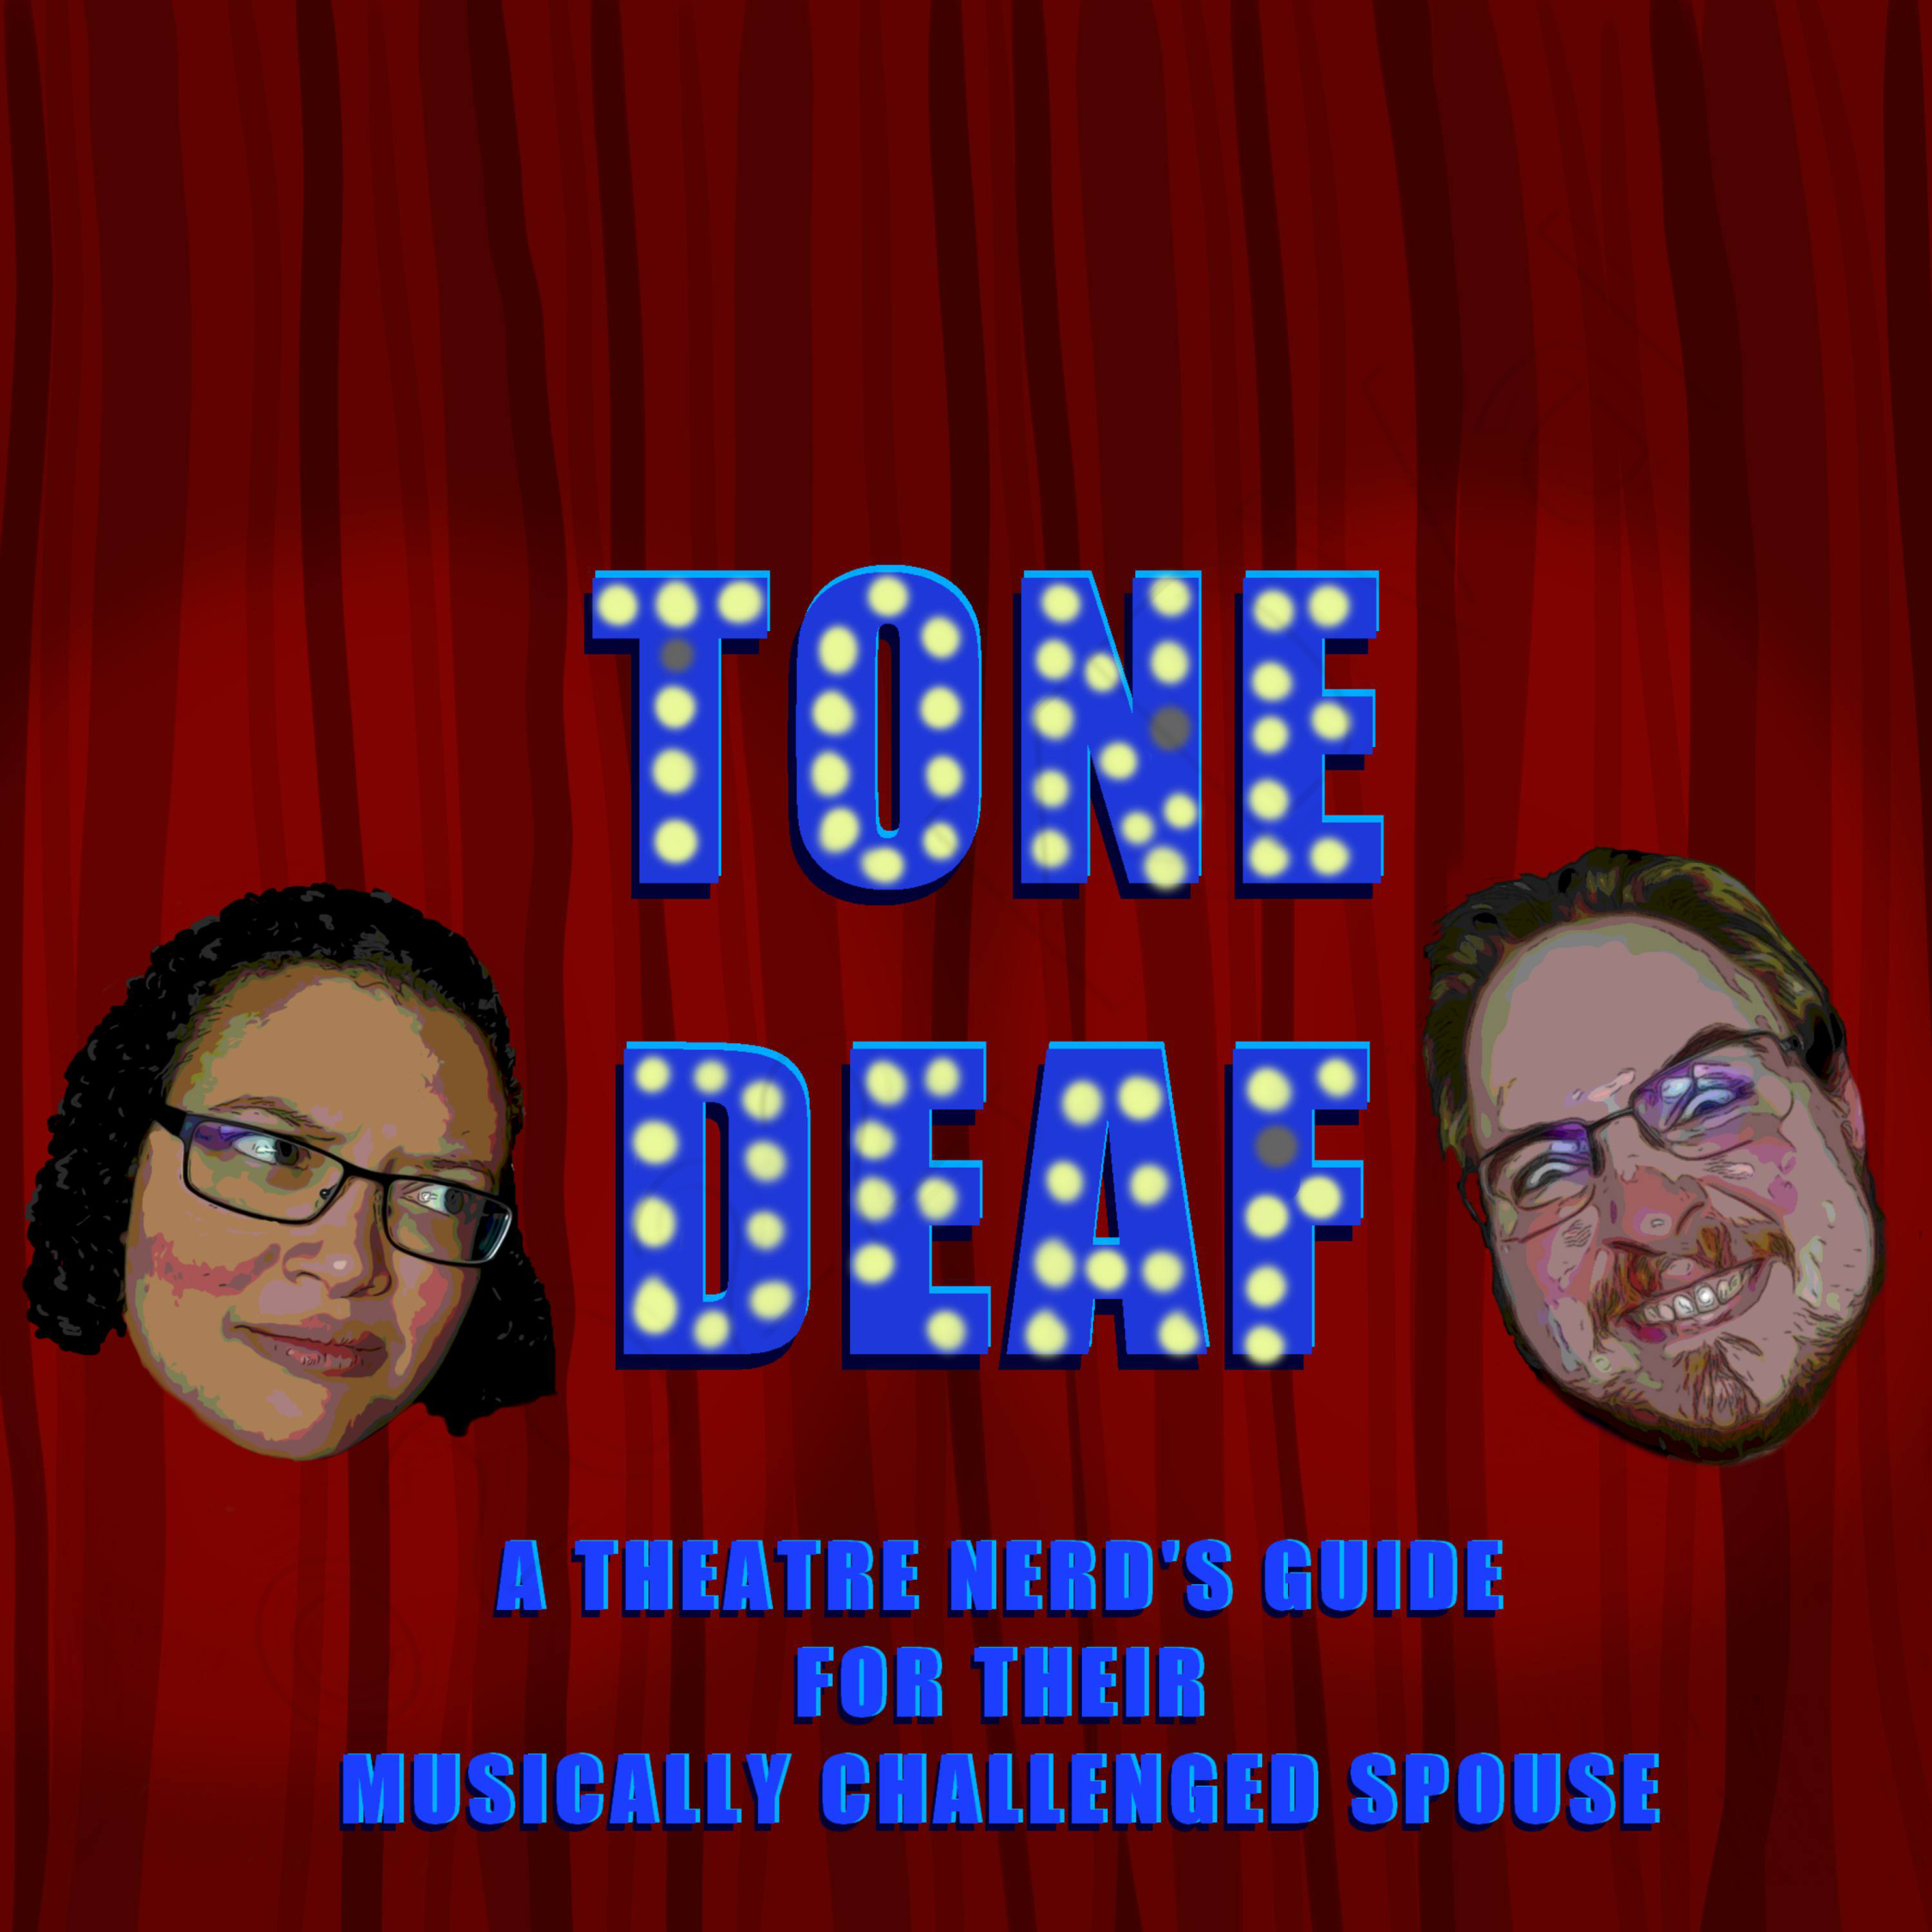 The logo for Tone Deaf: A Theatre Nerd's Guide for their Musically Challenged Spouse. A medium skin-toned Black person looking concerned and a white man making a silly face are in front of a red curtain with two spotlights. Between them are the words 'Tone Deaf A Theatre Nerd's Guide for their Musically Challenged Spouse' in Blue with lights that are intermittently on.